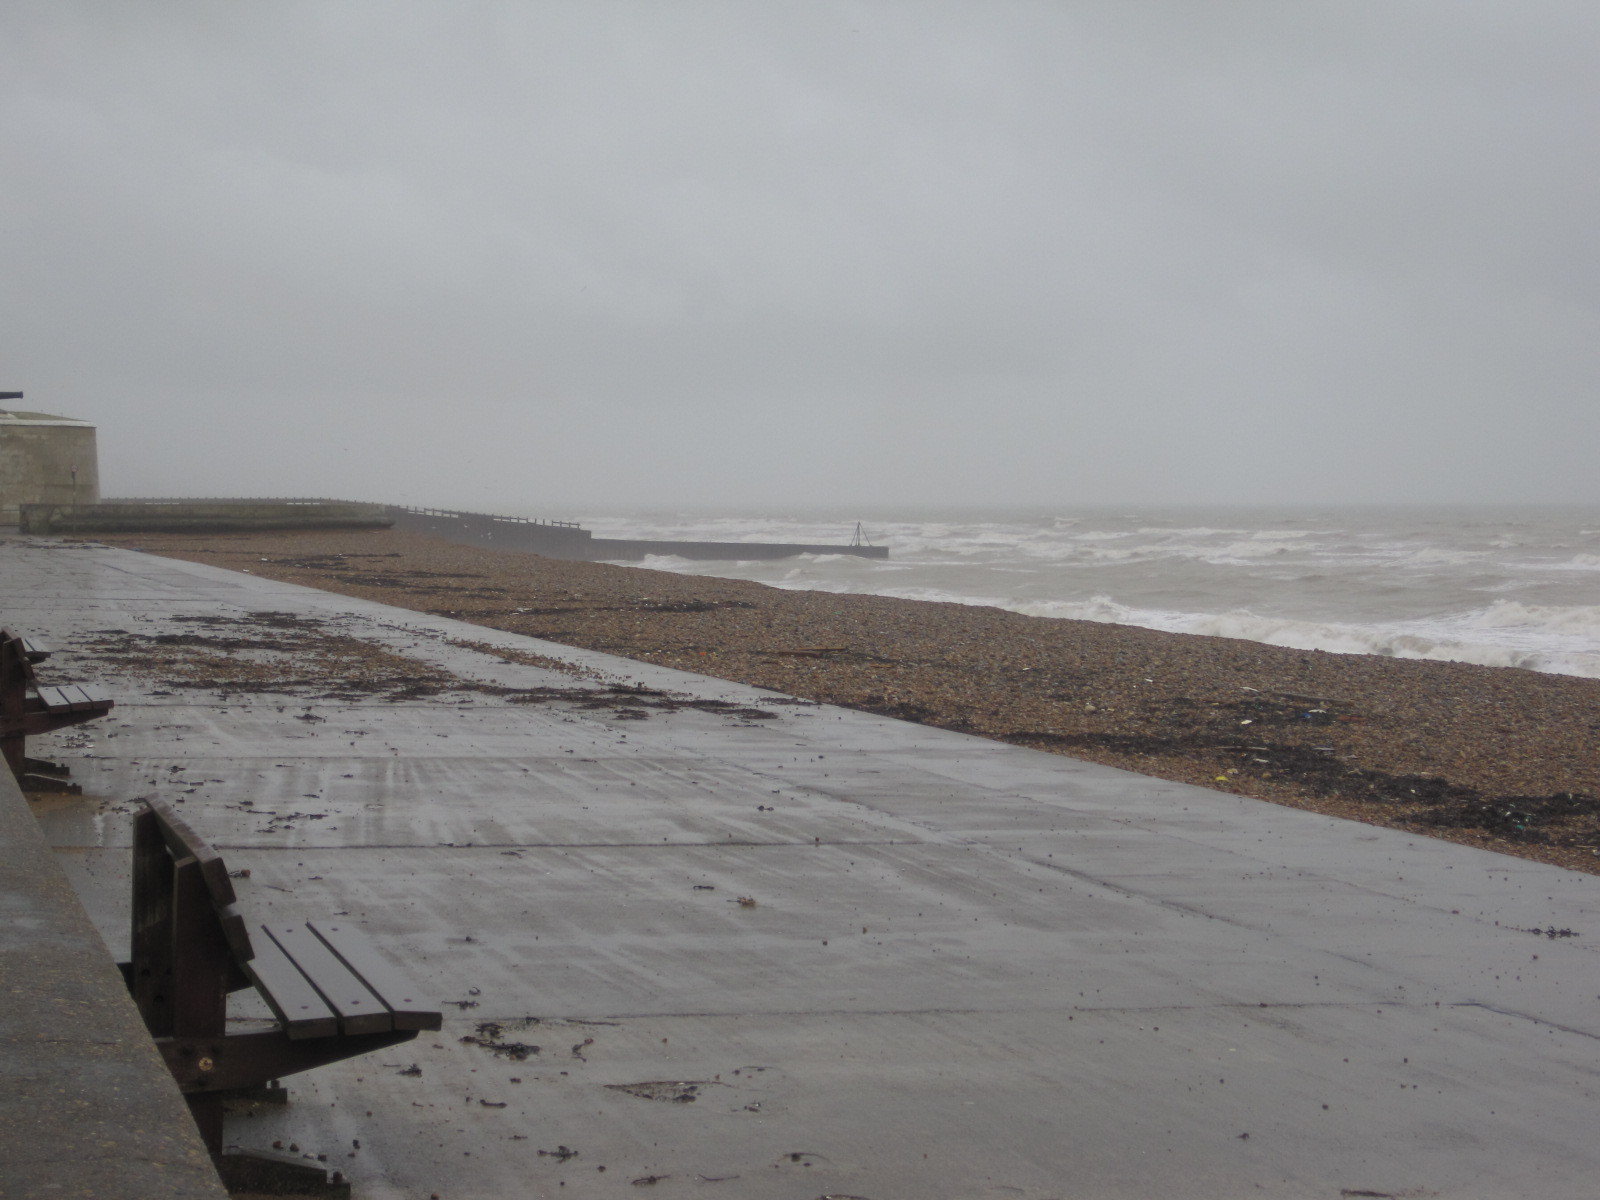 <strong>Seaford seafront in East Sussex, as people in a coastal town have been advised to stay in and keep doors and windows shut after reports of a noxious odour.</strong>